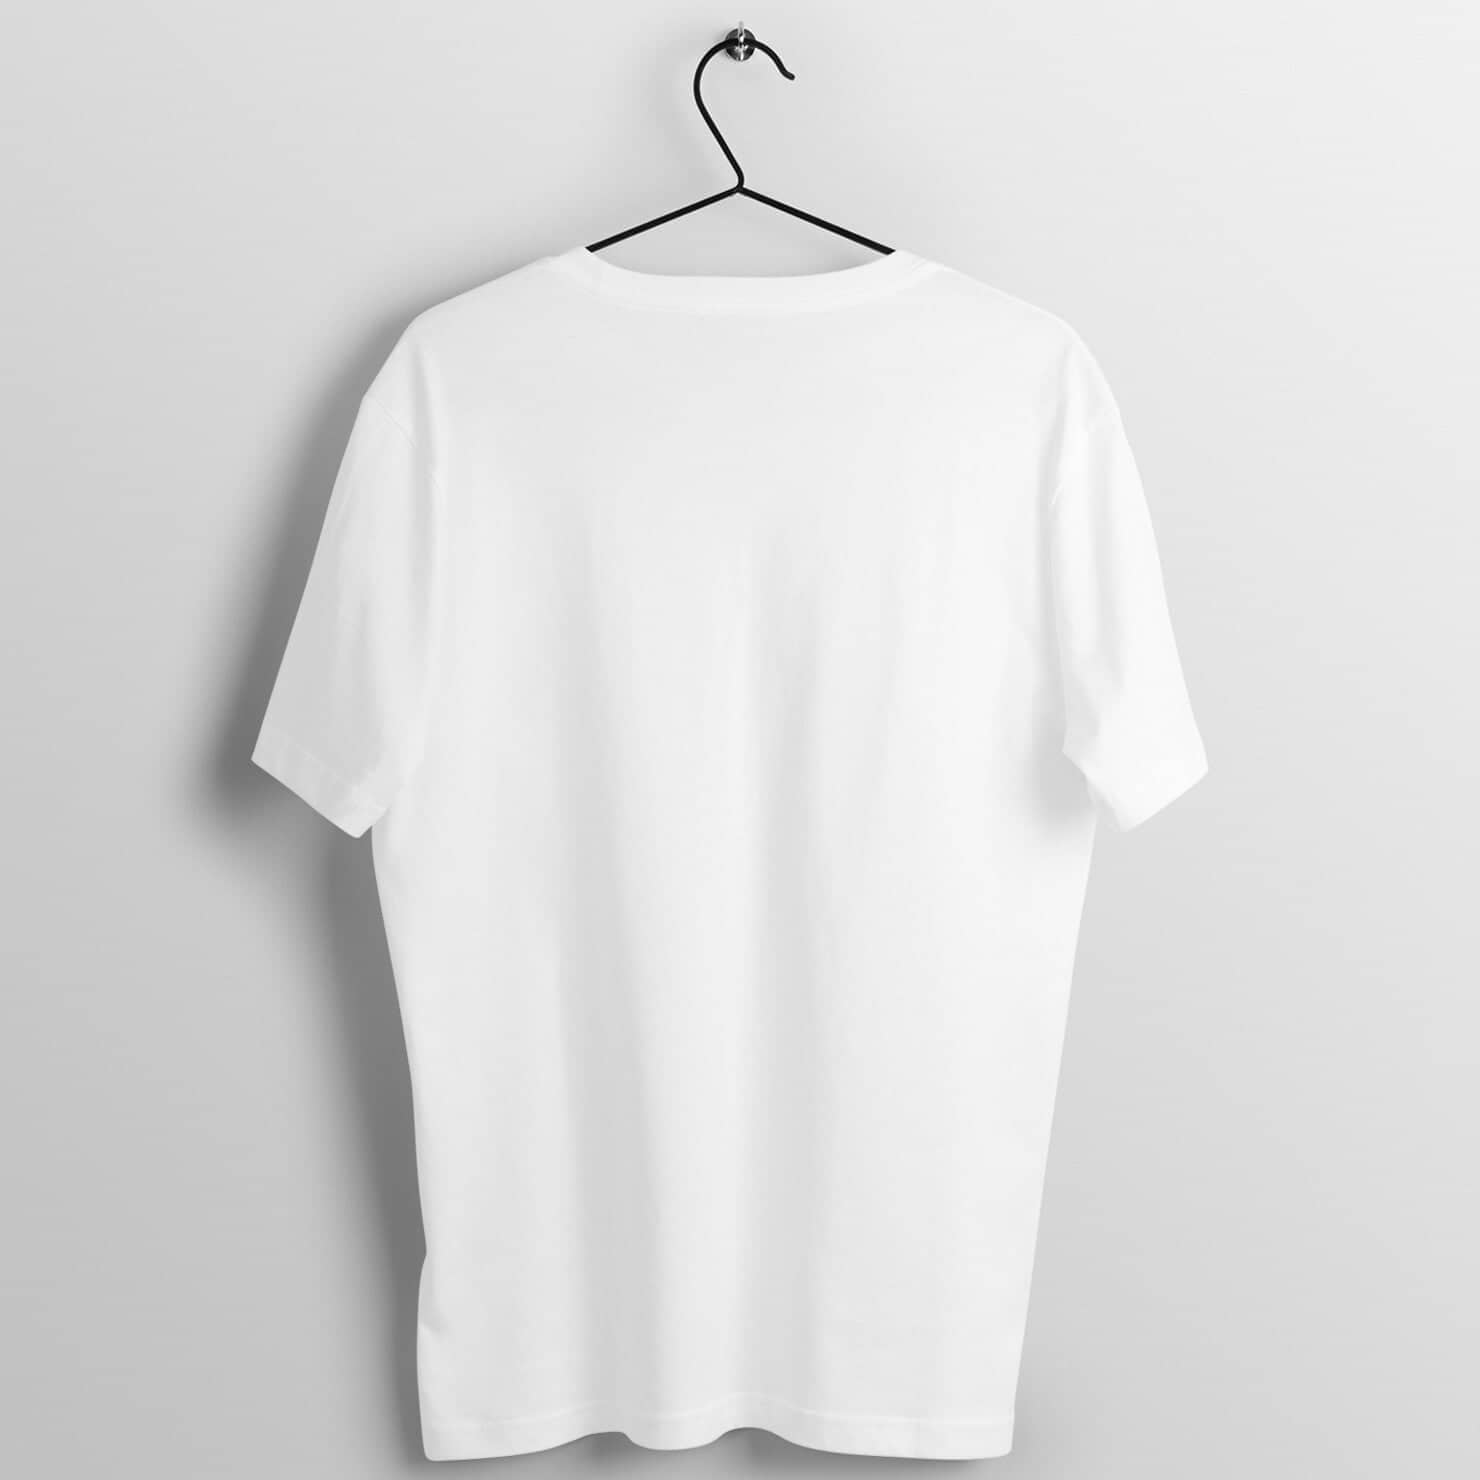 Workhorse Supreme White T Shirt for Men and Women freeshipping - Catch My Drift India